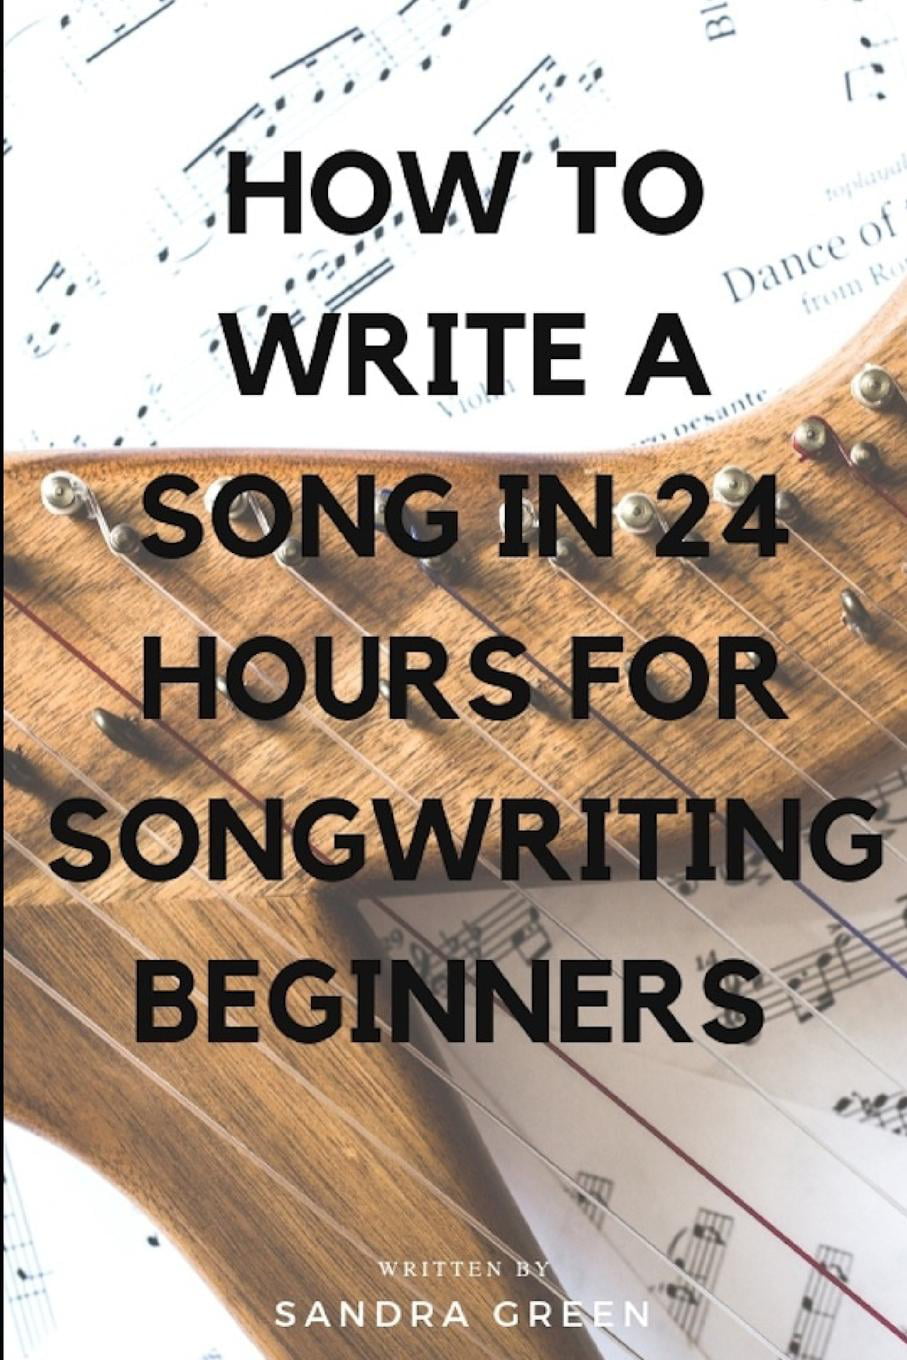 create a song assignment